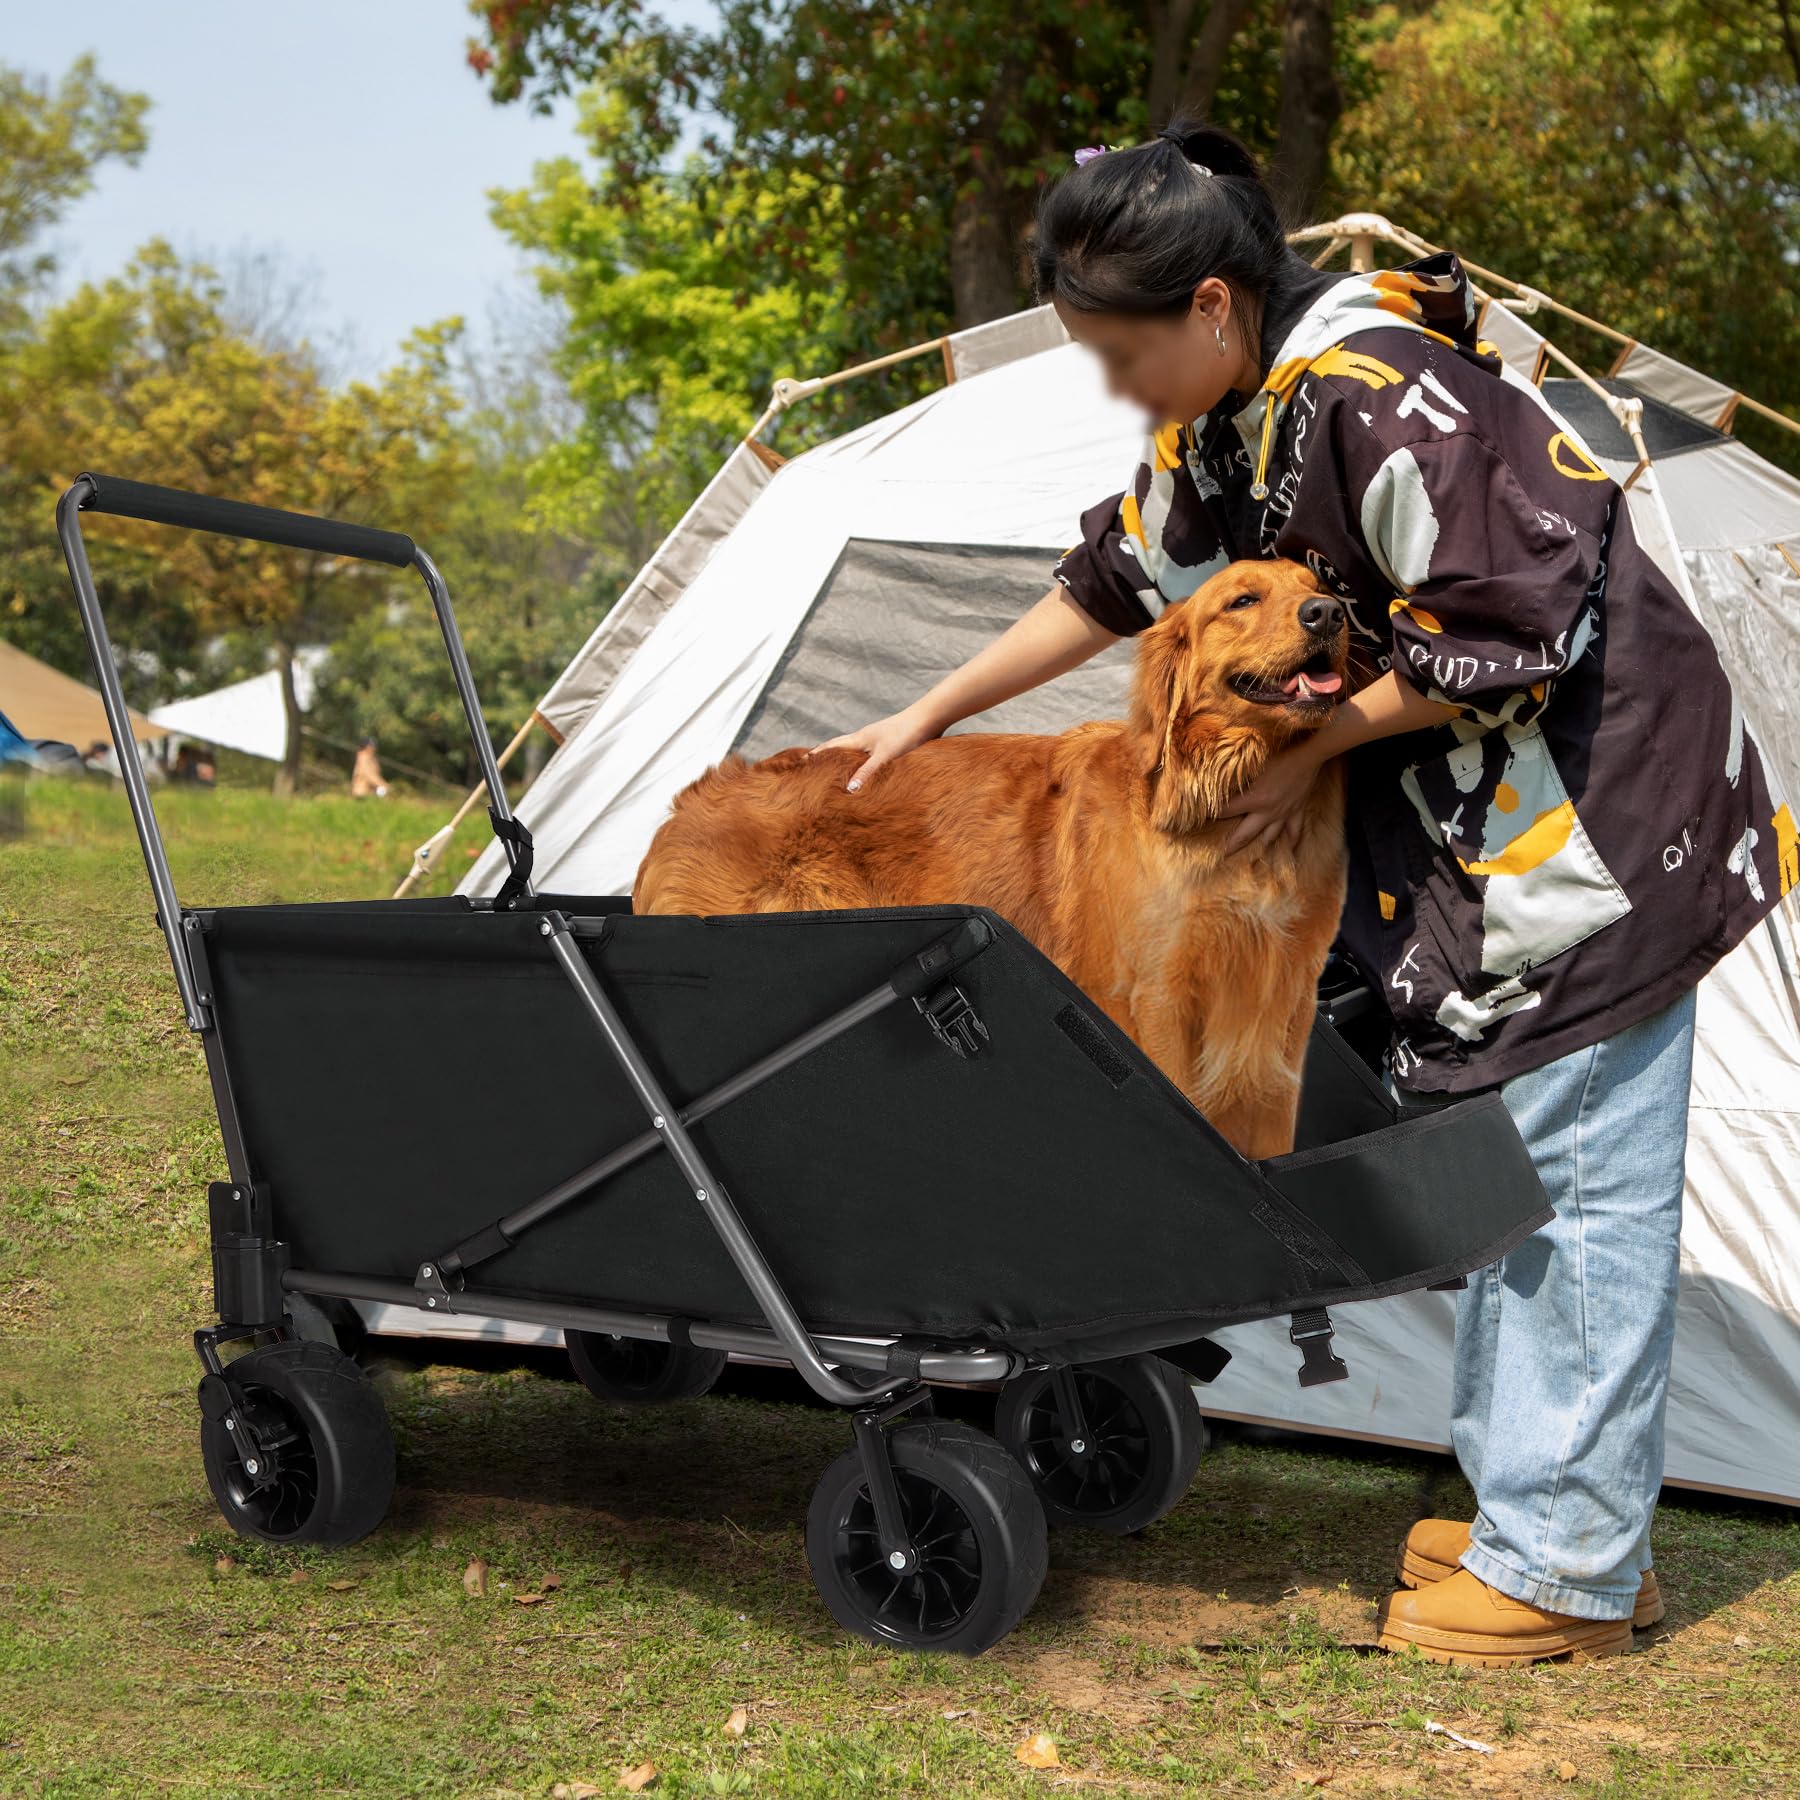 REDCAMP Folding Dog Wagon Cart with Extendable Rear End Heavy Duty, 220L Large Collapsible Utility Pet Wagon Garden Cart with Brakes for Sand Camping Sports Shopping